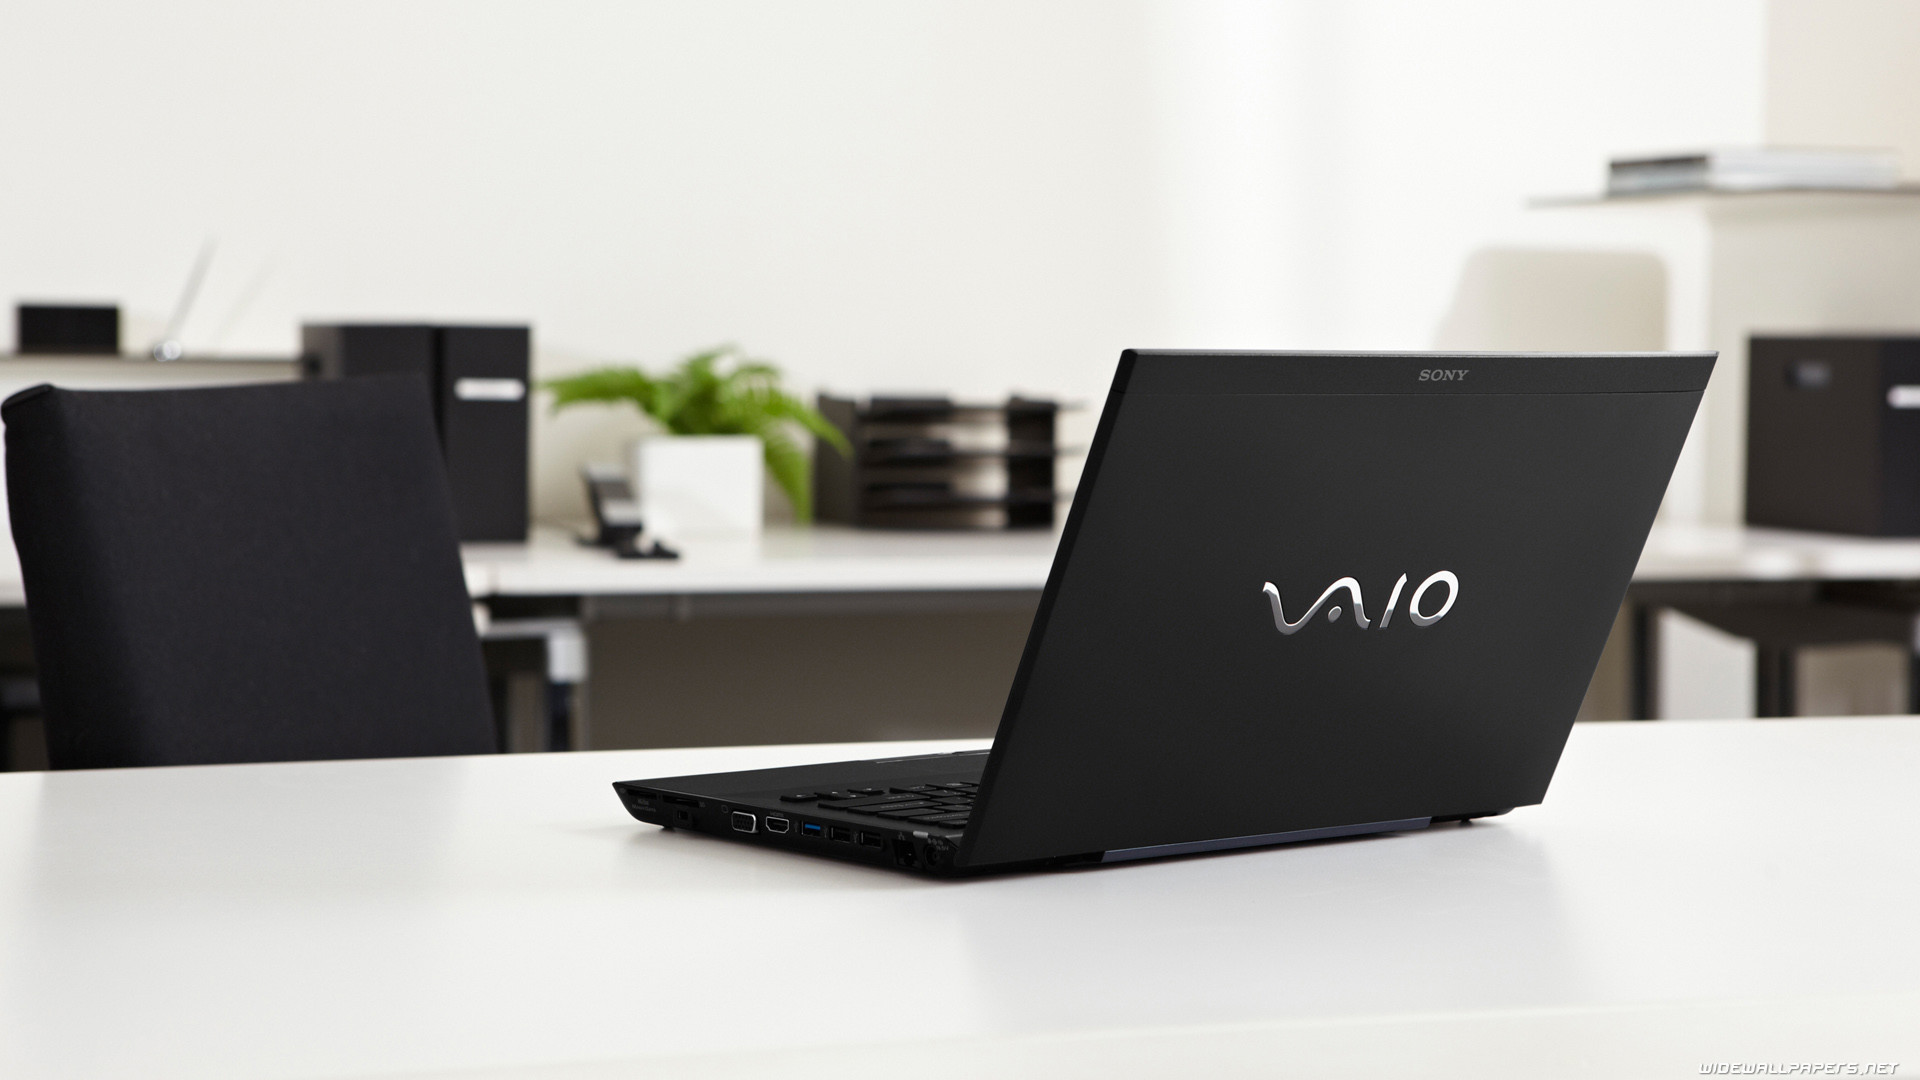 1920x1080 Notebooks wide wallpapers and HD wallpapers. Sony Vaio notebook